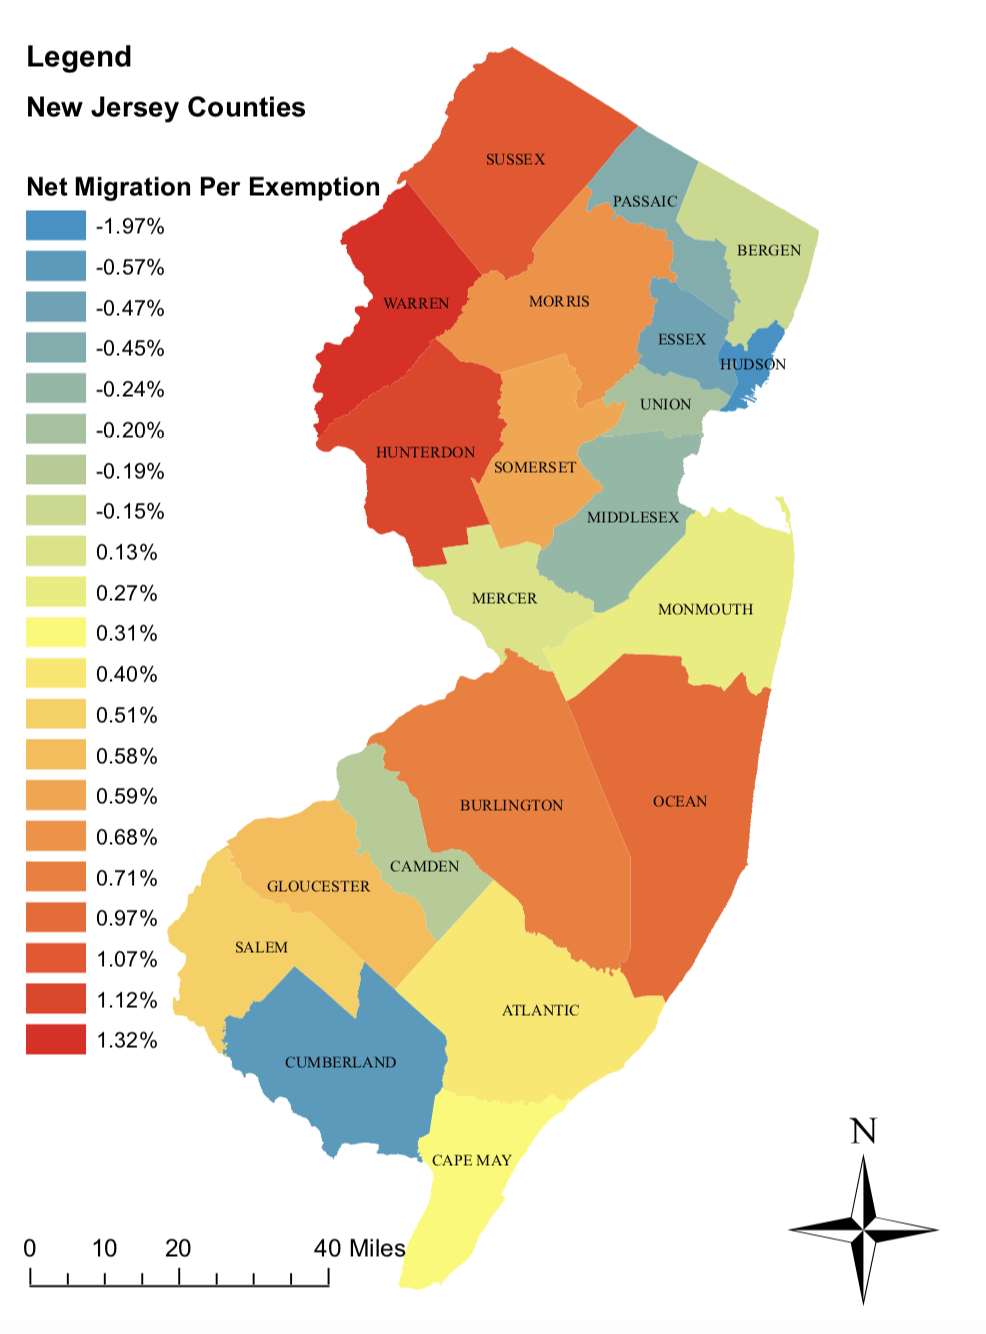 County Net Migration Rates in New Jersey, 2018-2019